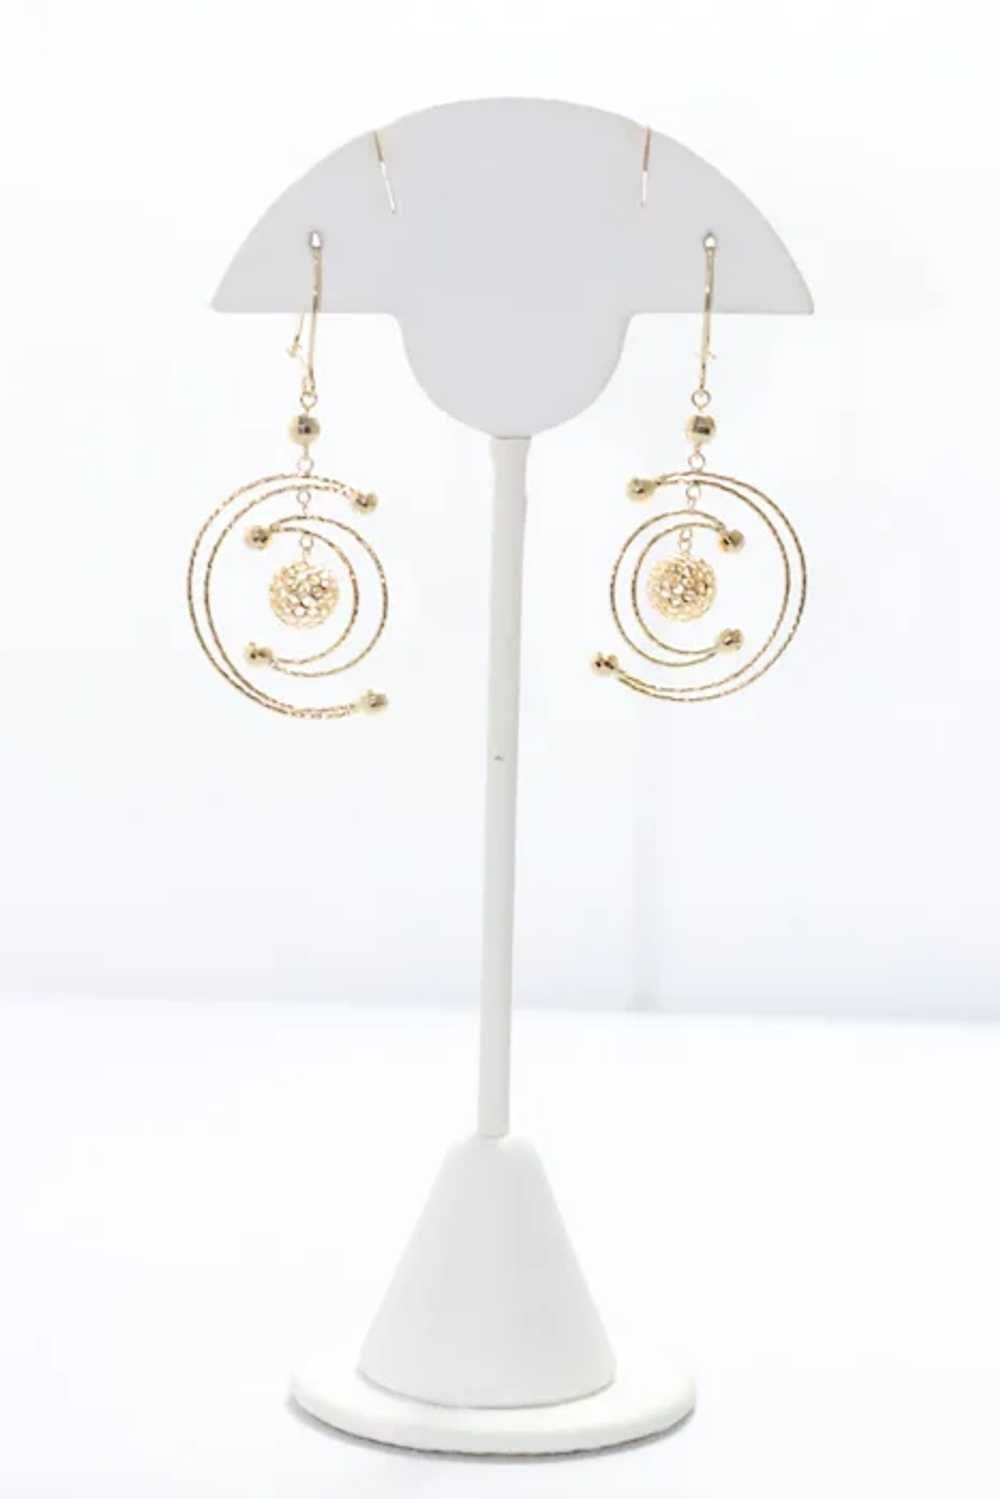 Gorgeous 14KT Yellow Gold Moon Earrings - image 2